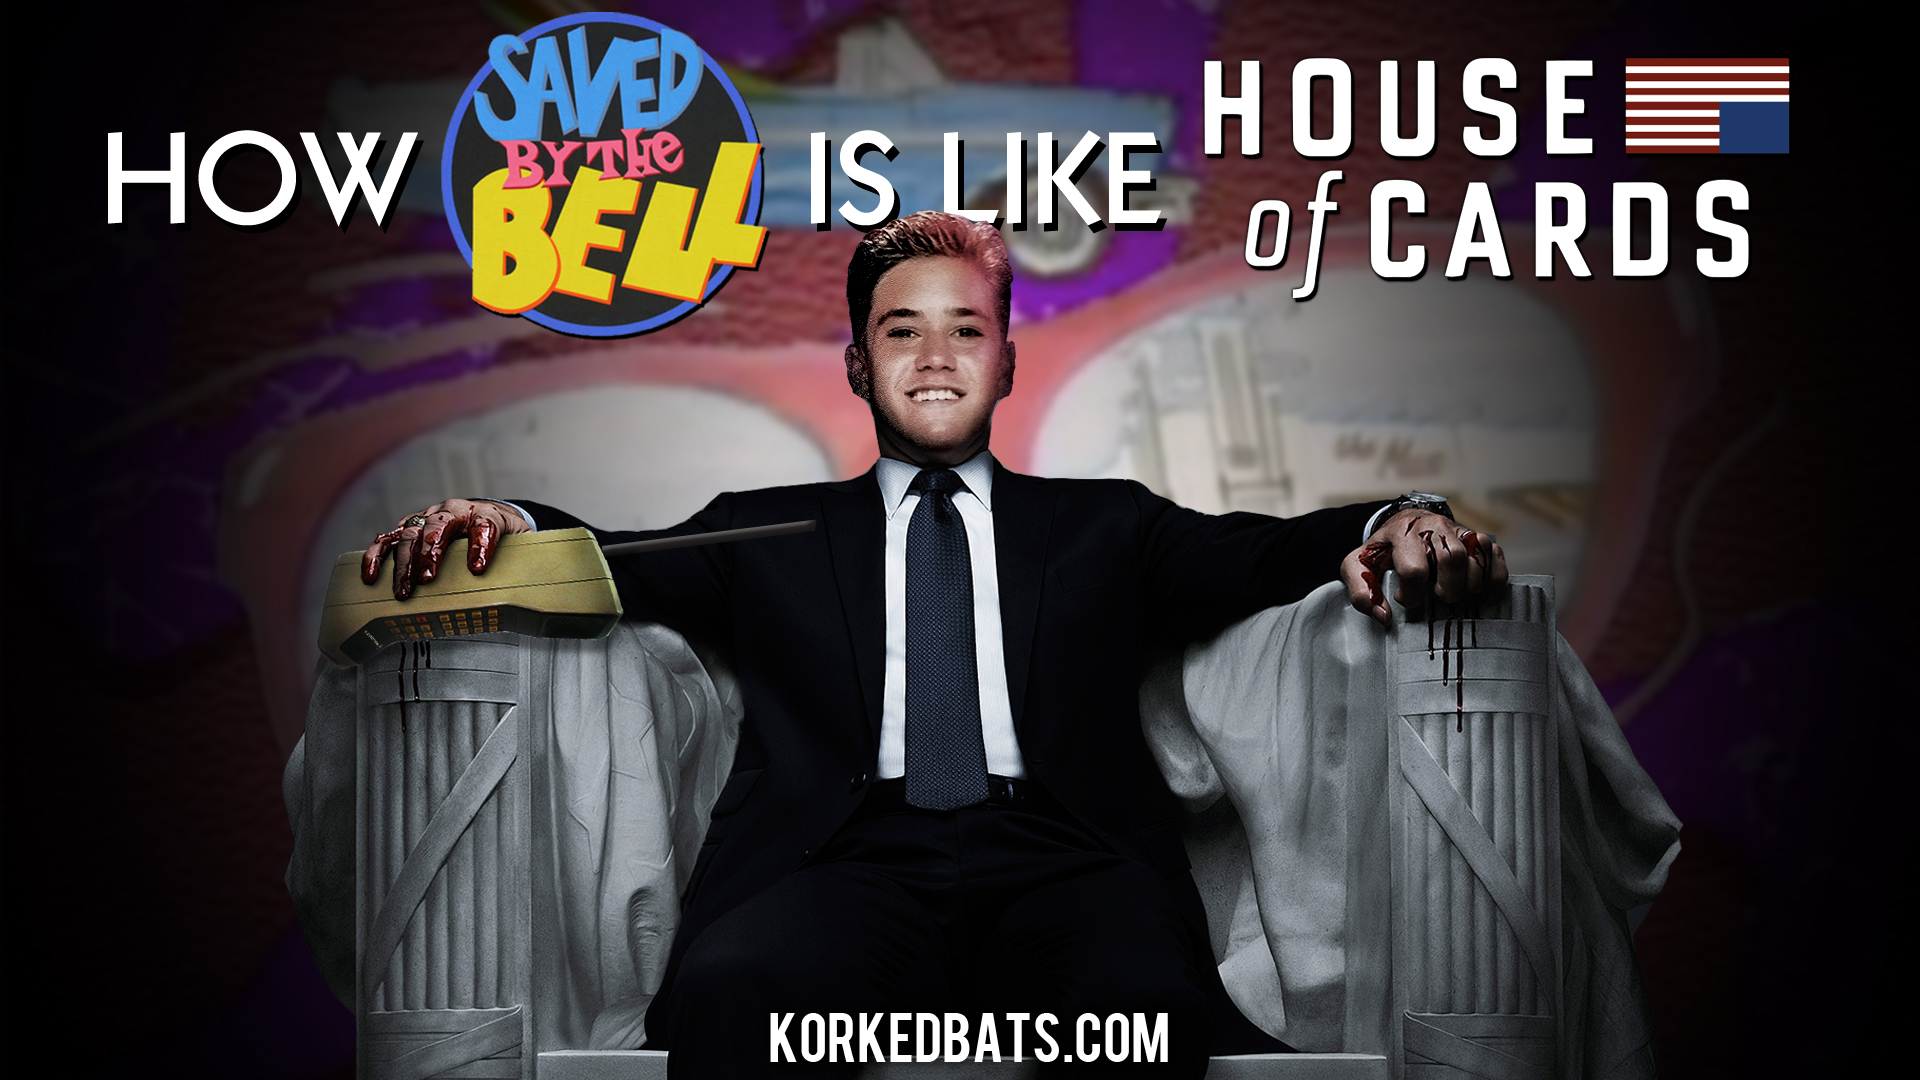 Saved By The House of Cards 3